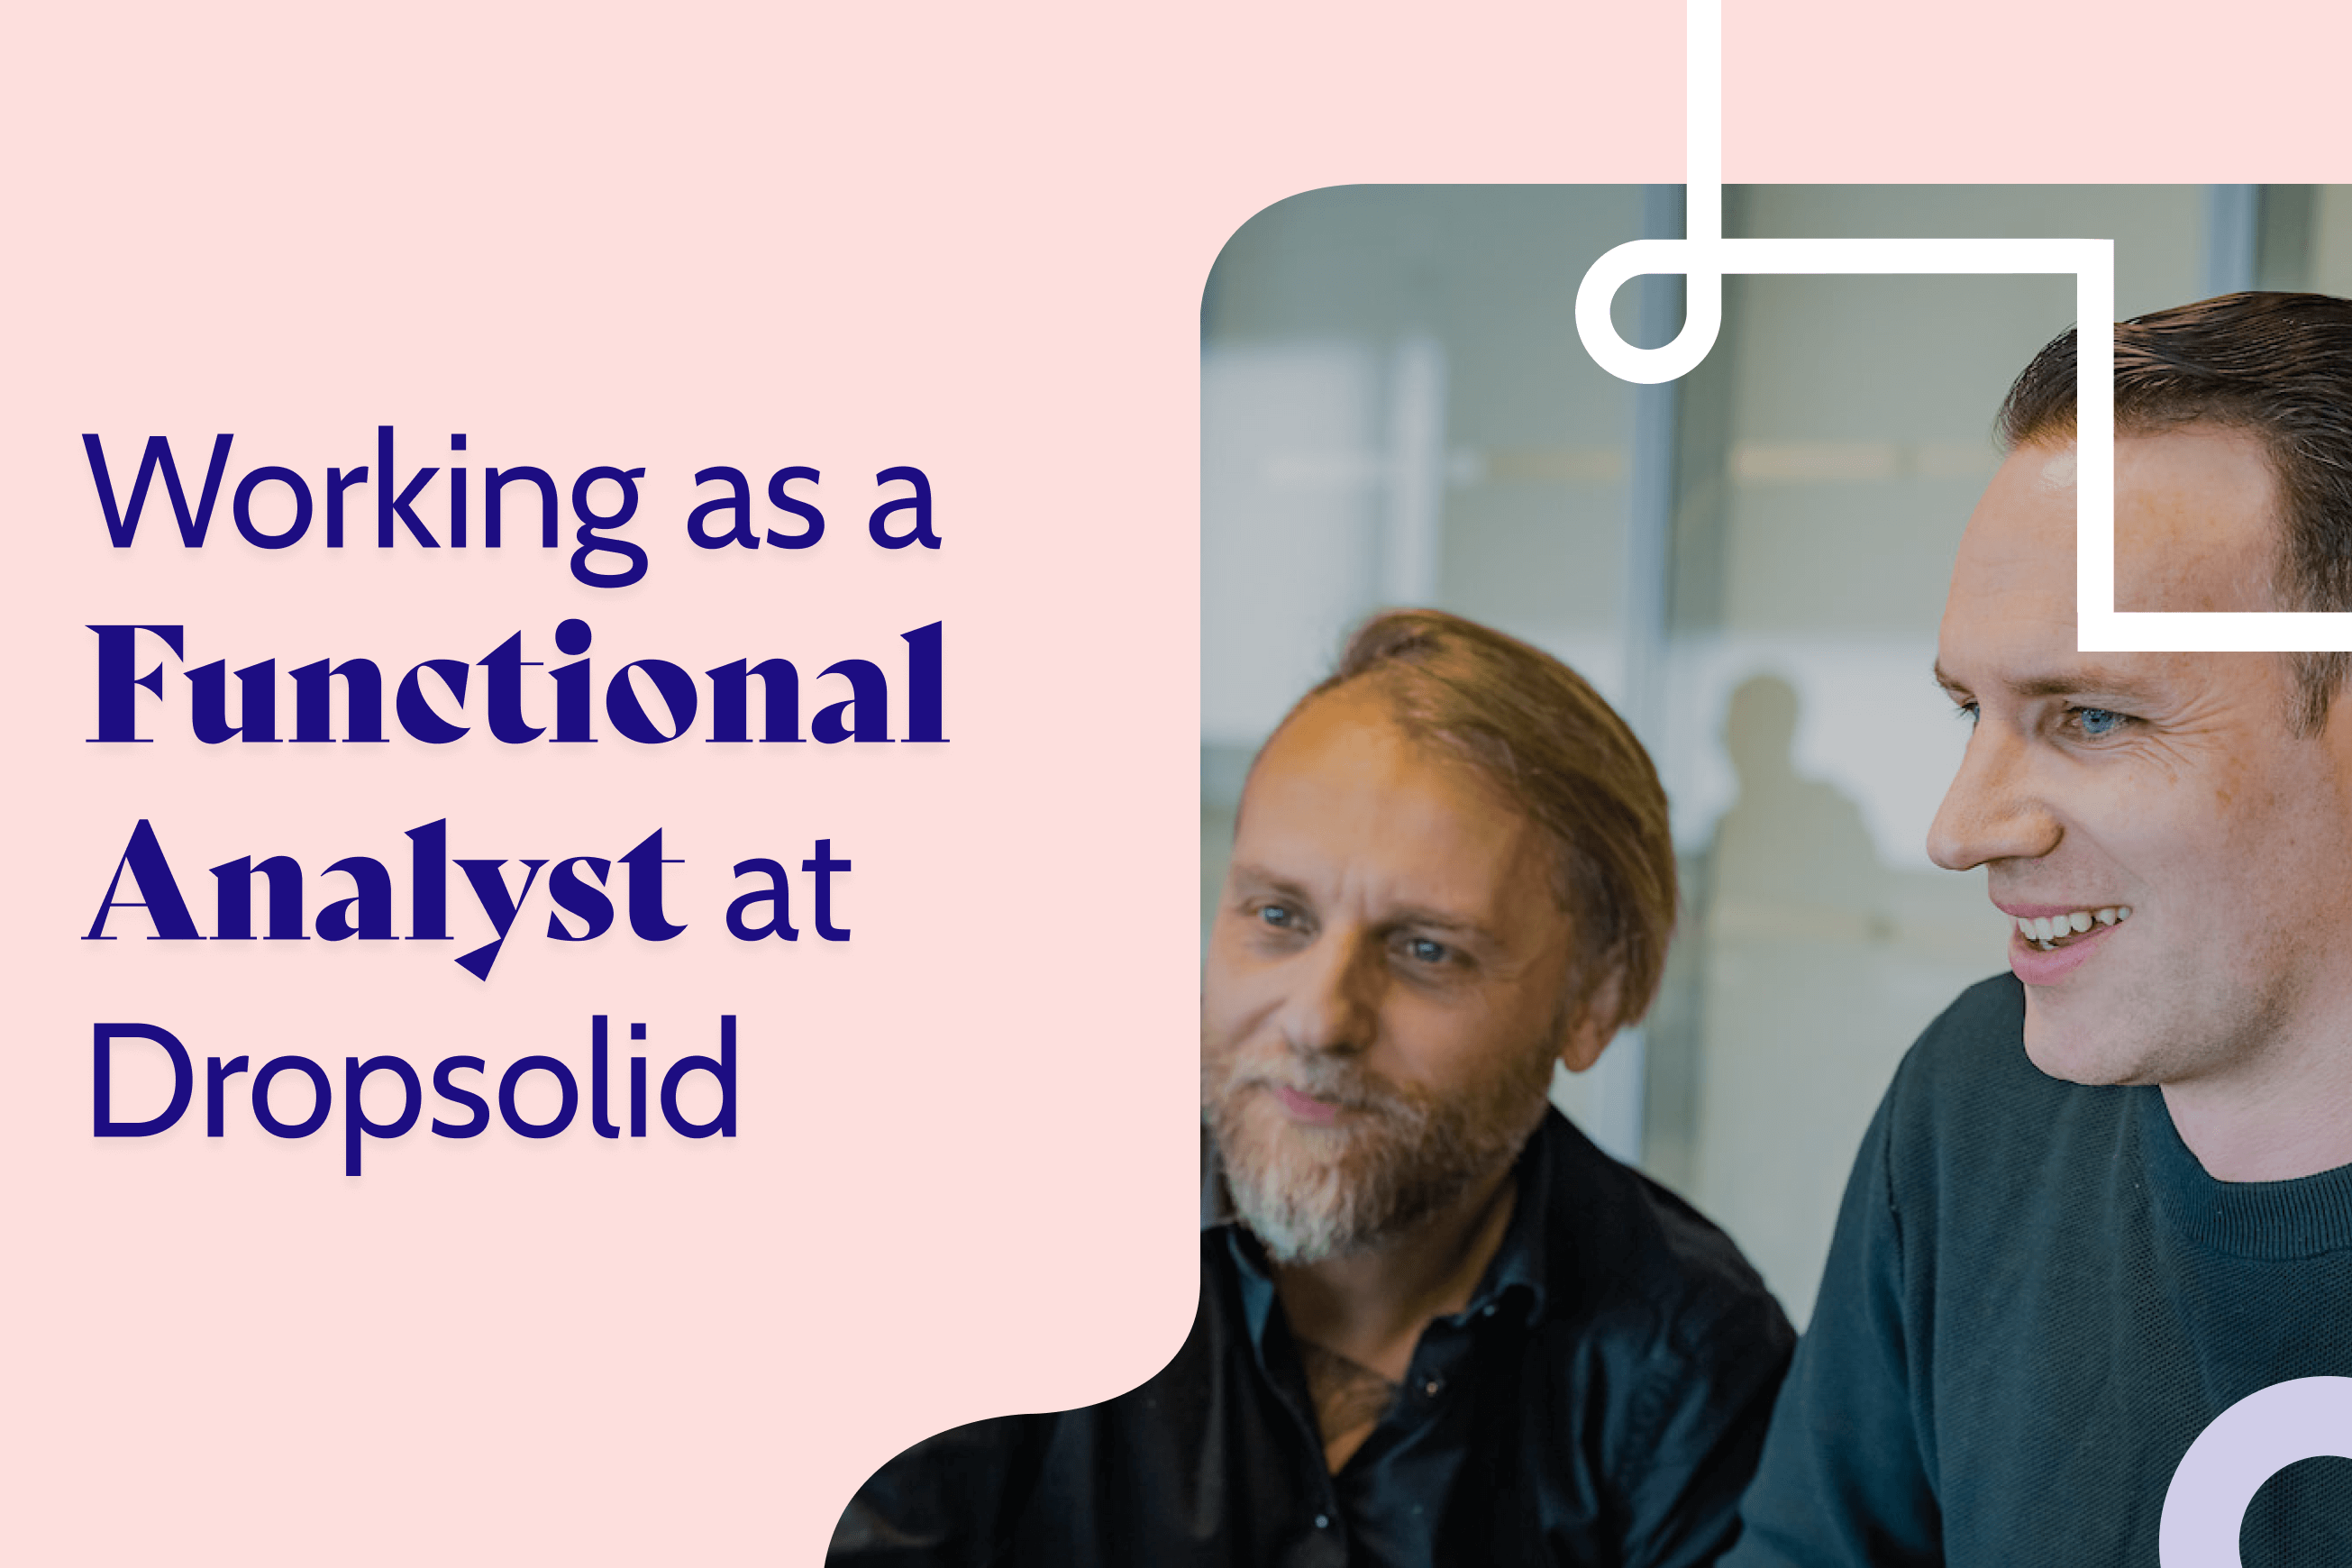 Functional Analyst at Dropsolid